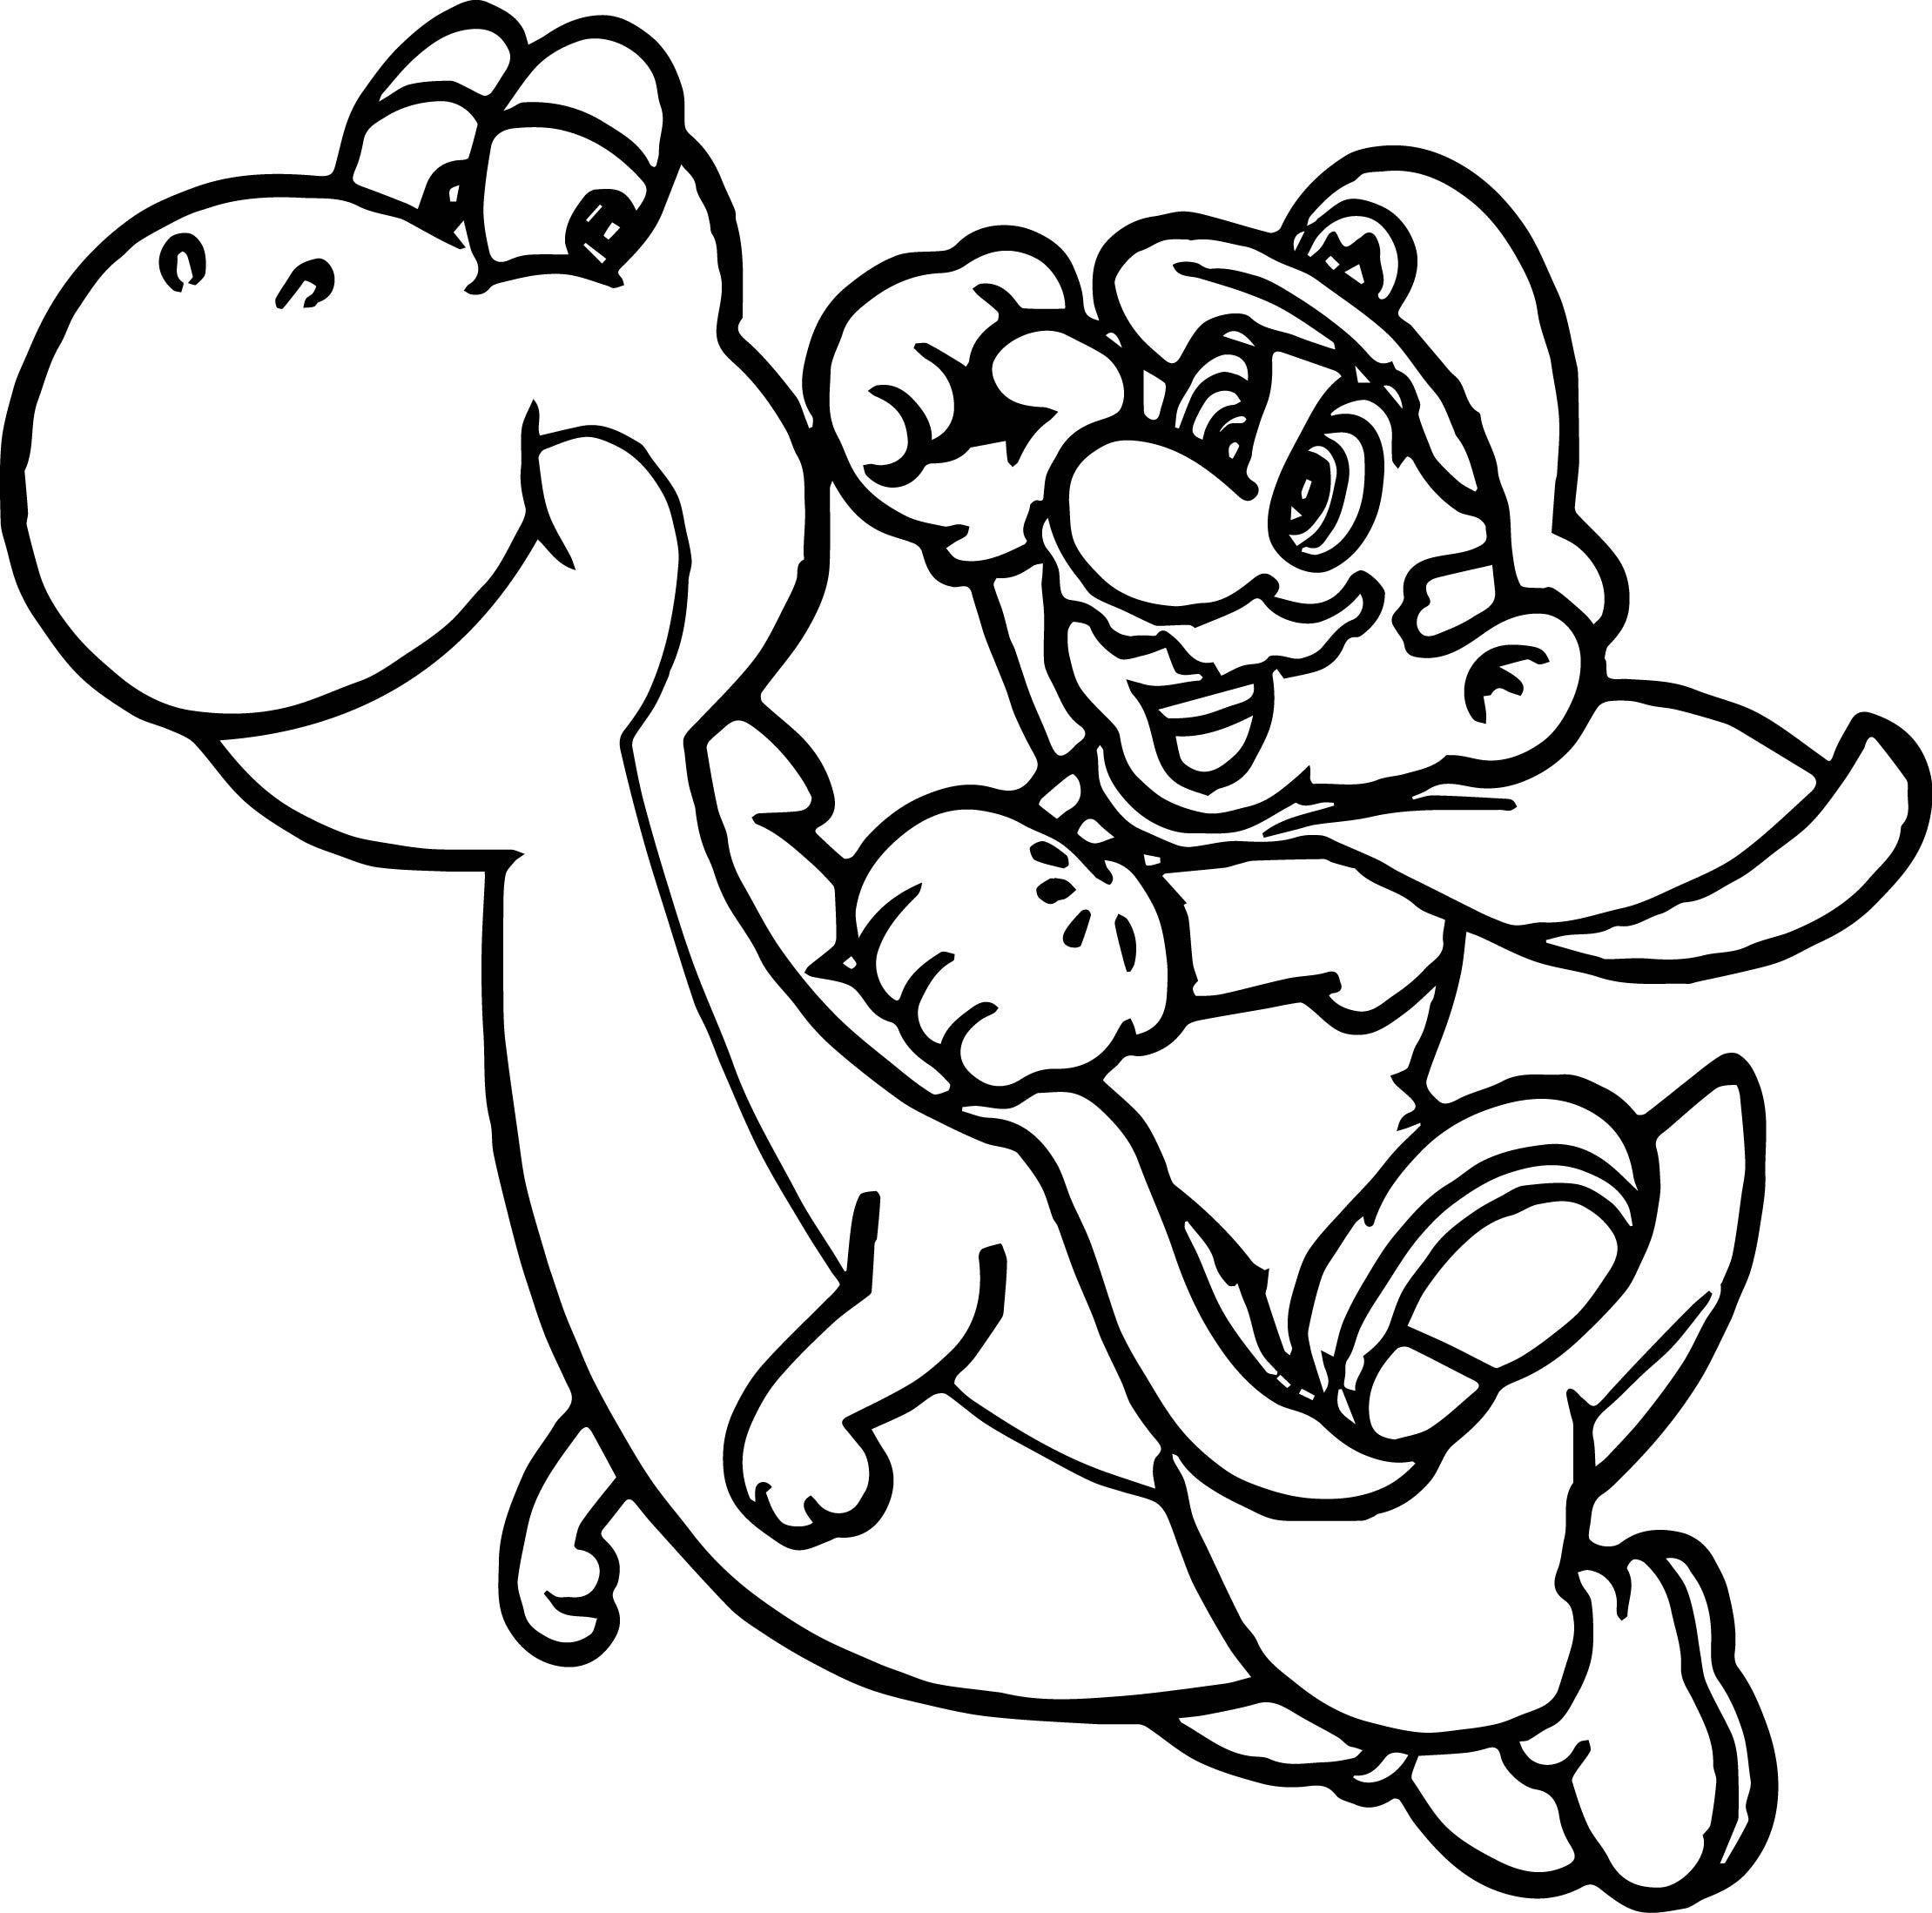 The best free Yoshi coloring page images. Download from 462 free